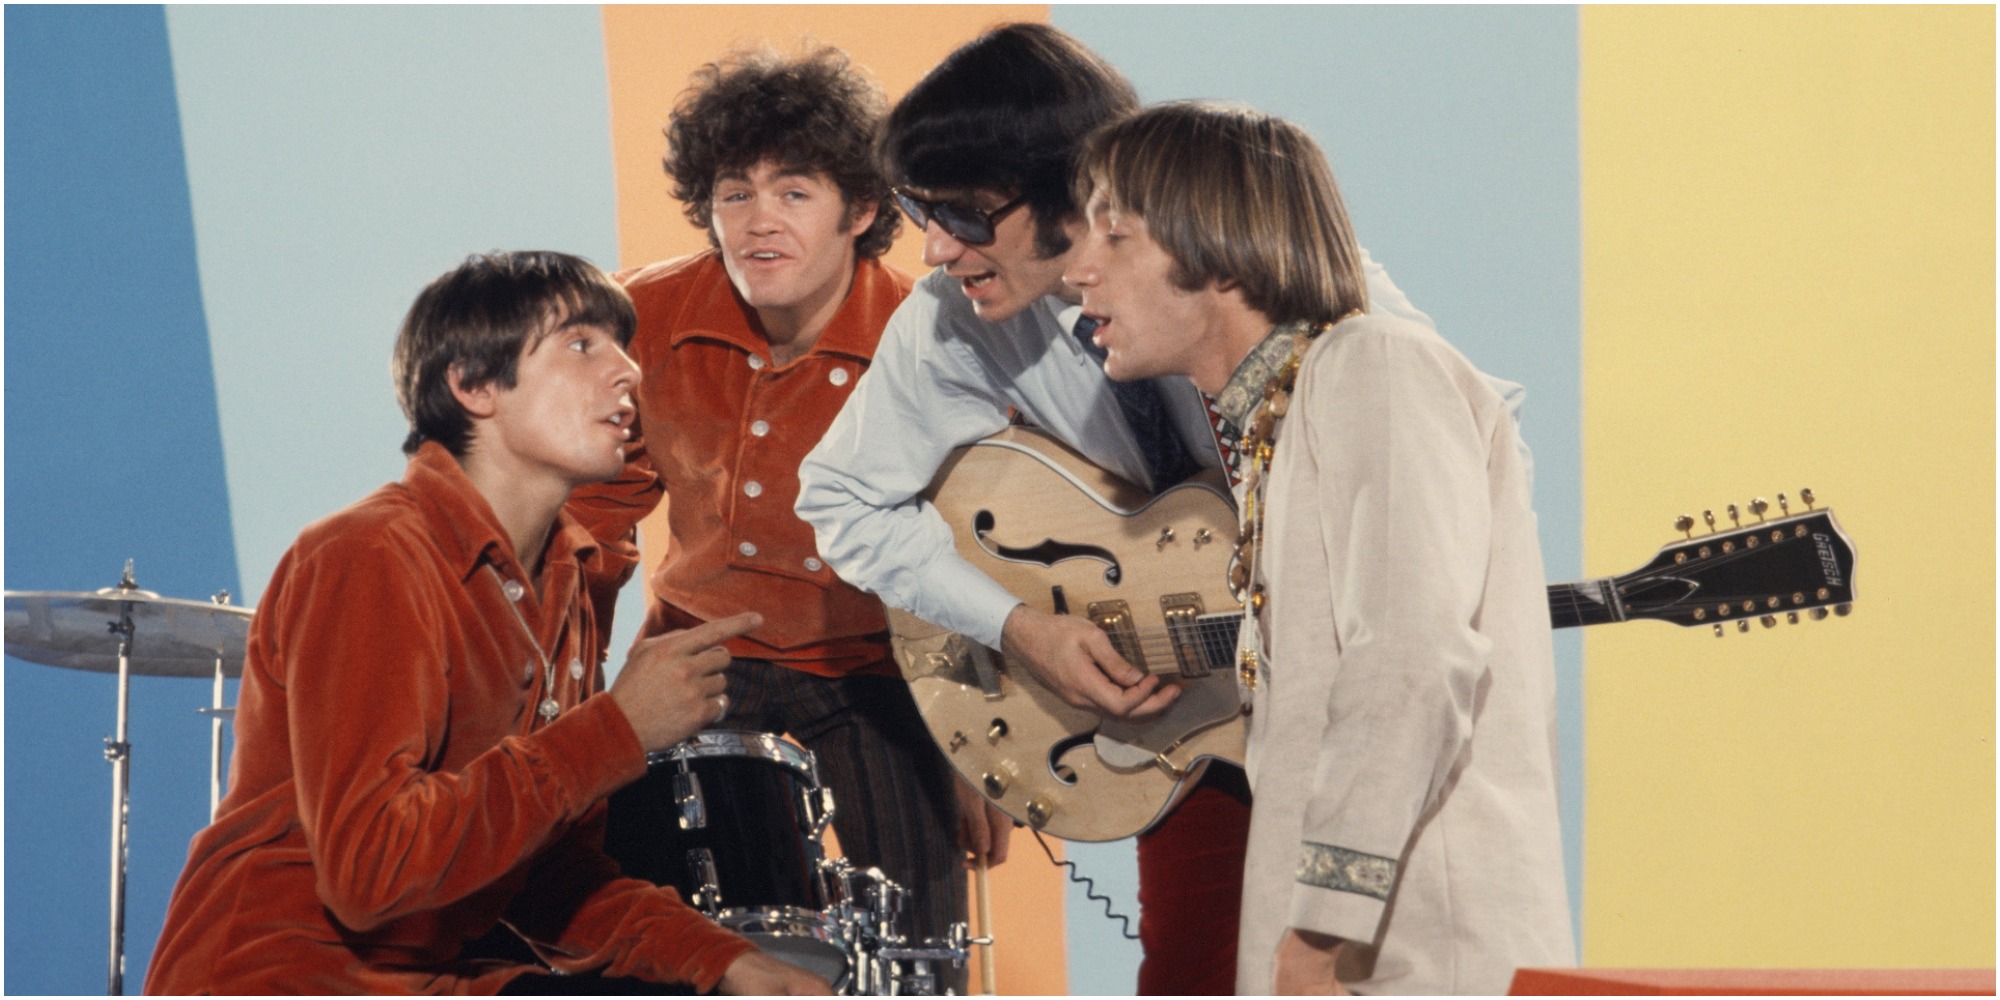 The Monkees pose for a publicity photo on the set of The Monkees televisoin show.